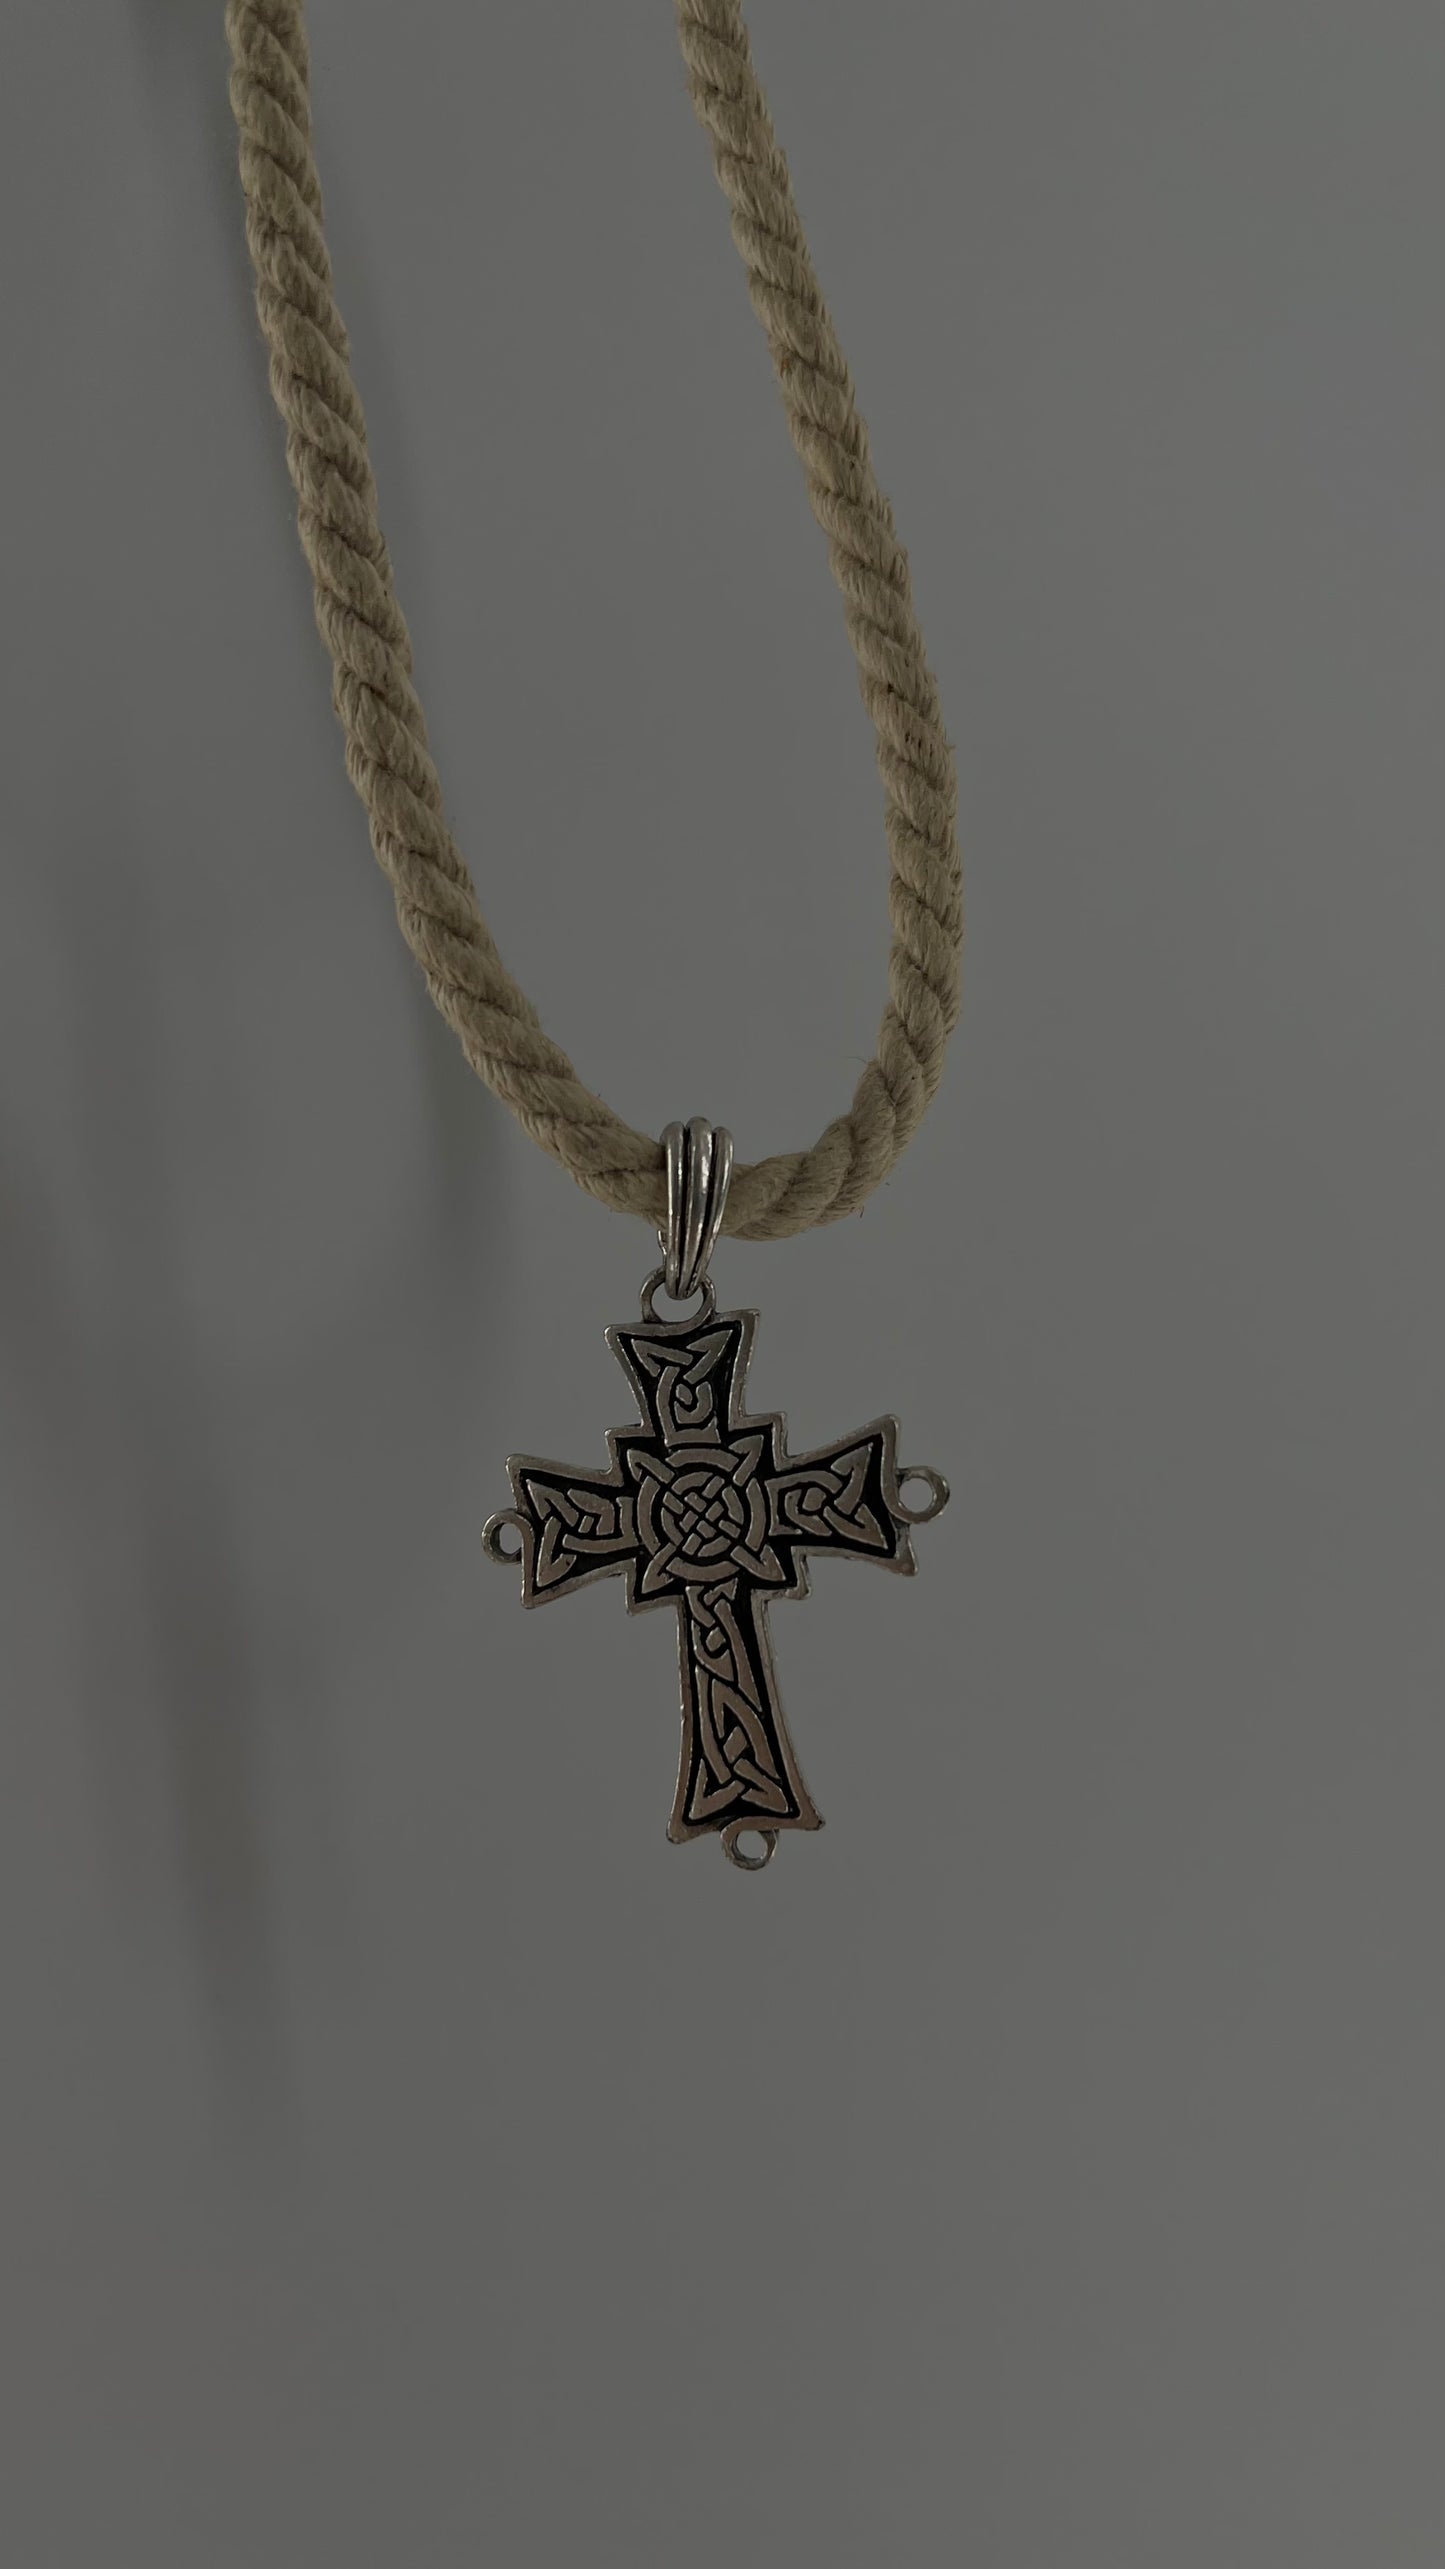 90s Next Generation Rope Necklace with Silver Engraved Cross